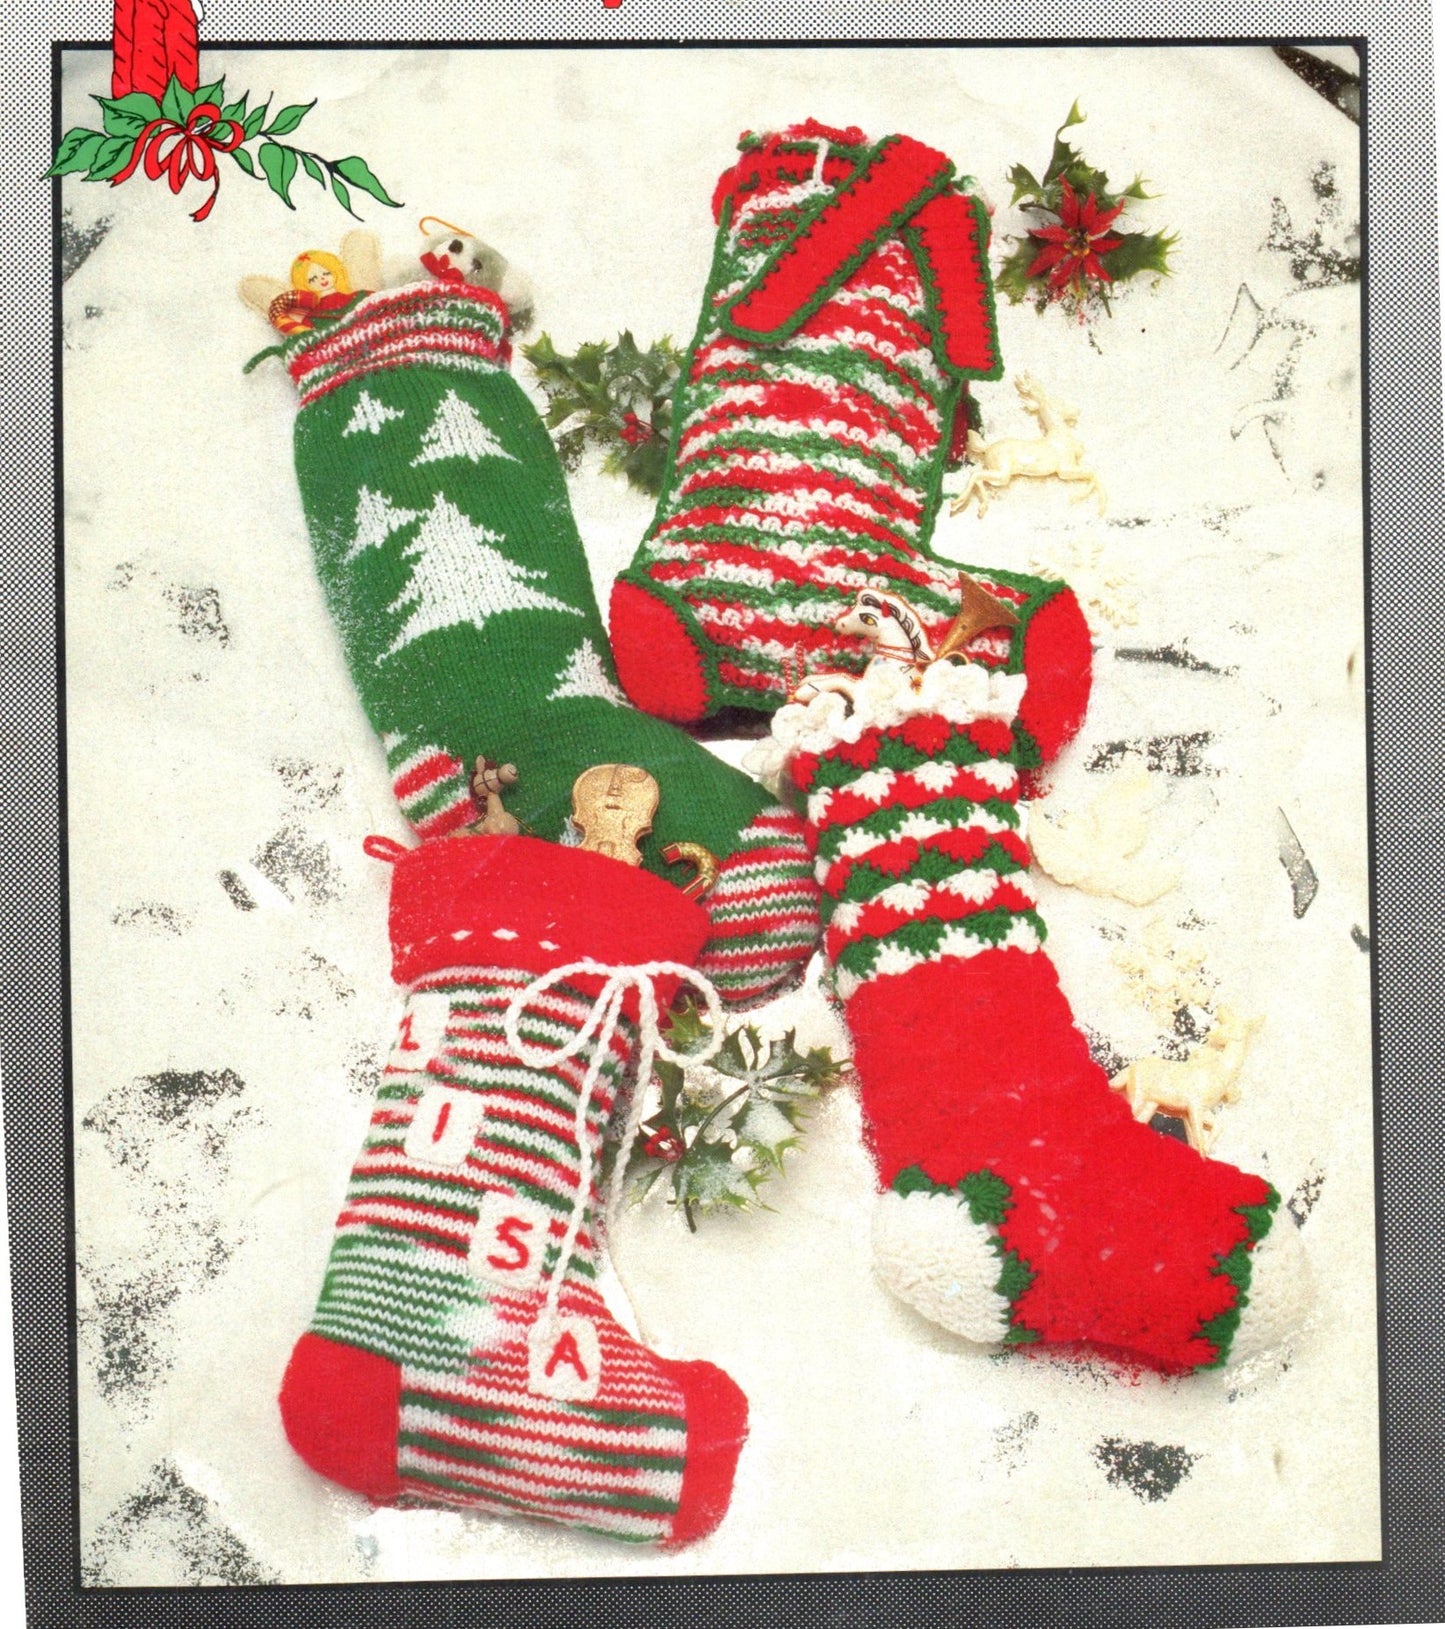 Vintage Knit Crochet Christmas Stocking Pattern Tree Personalizable Knitted PDF Pattern - At Grandma's Table